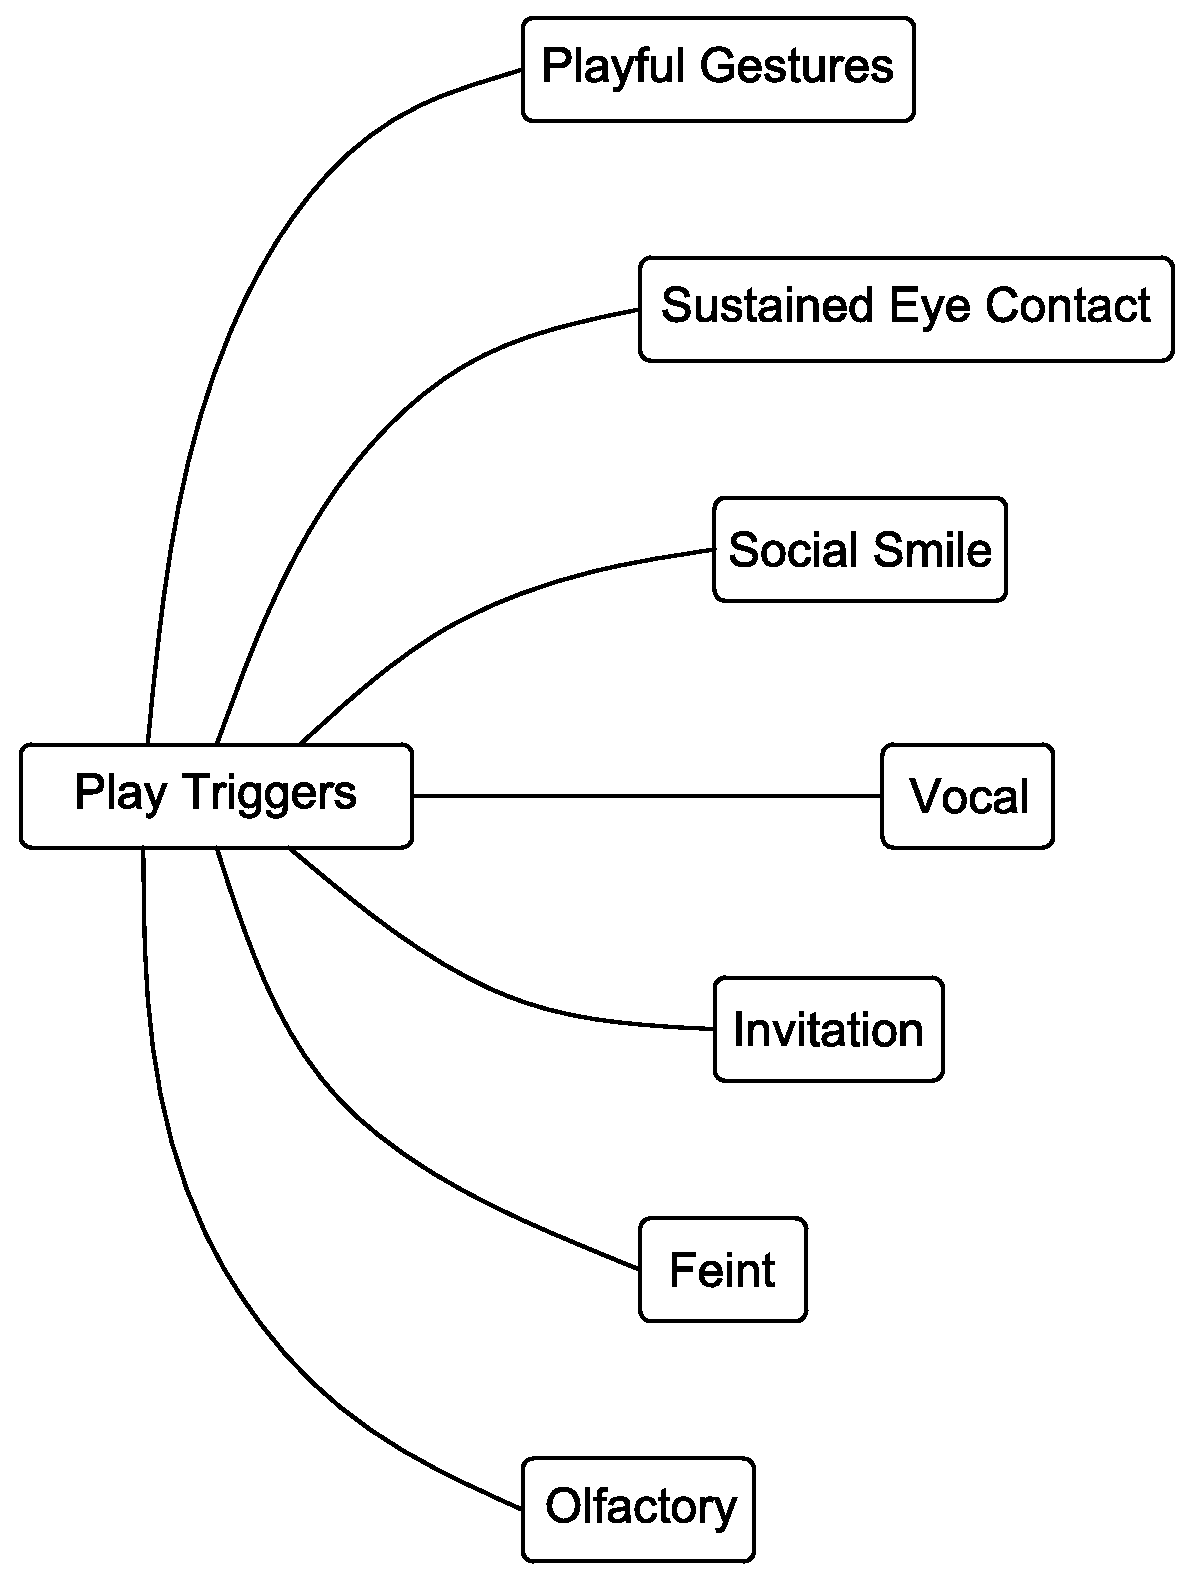 System and methods for biometric detection of play states, intrinsic motivators, play types/patterns and play personalities